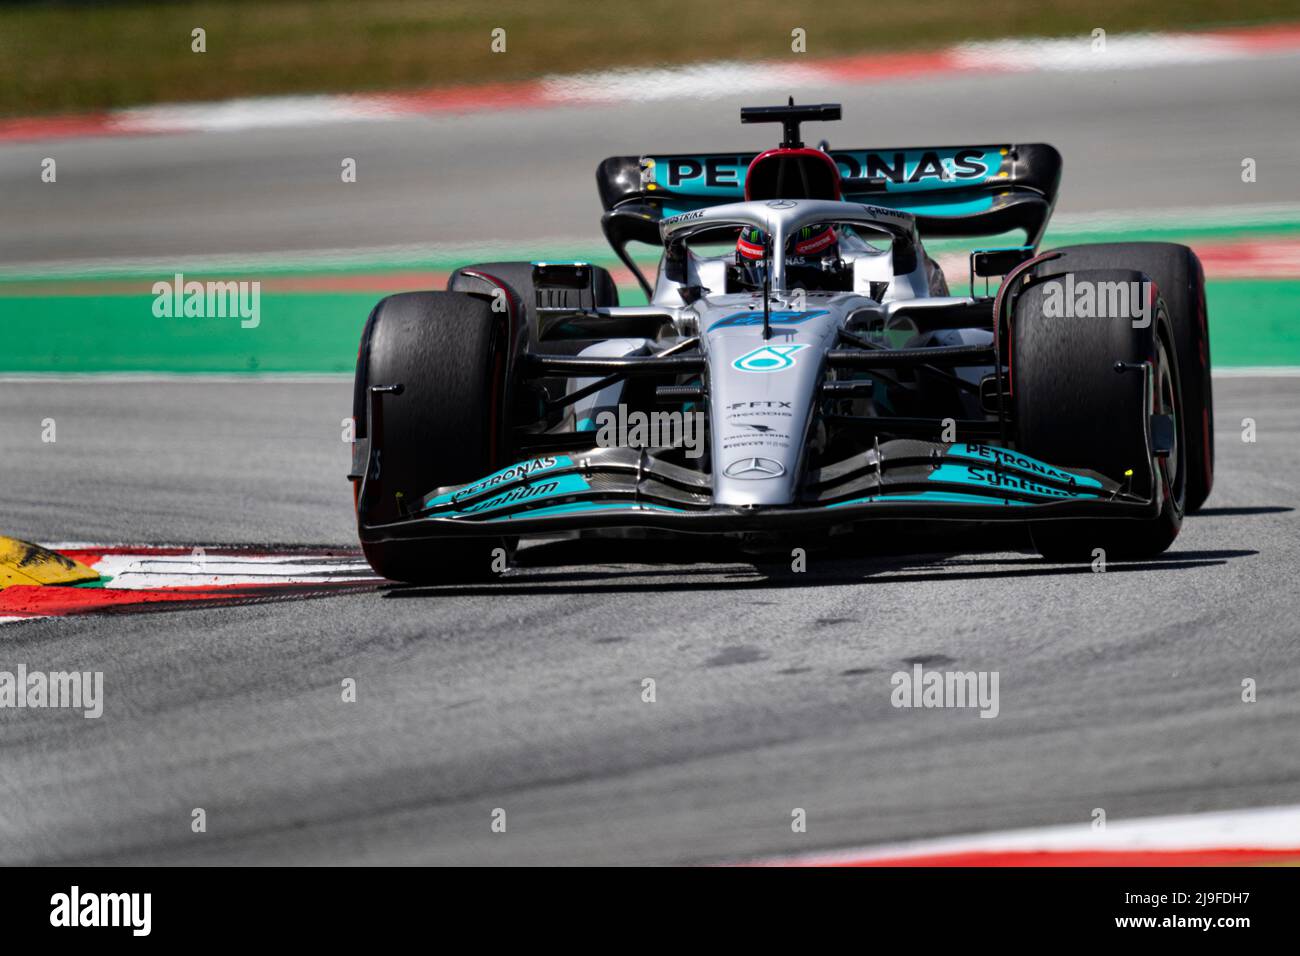 George Russell of Great Britain and Mercedes drives his W13 during third practice ahead of the F1 Grand Prix of Spain at Circuit de Barcelona-Catalunya on May 21, 2022 in Barcelona, Spain. Foto: Siu Wu. Stock Photo